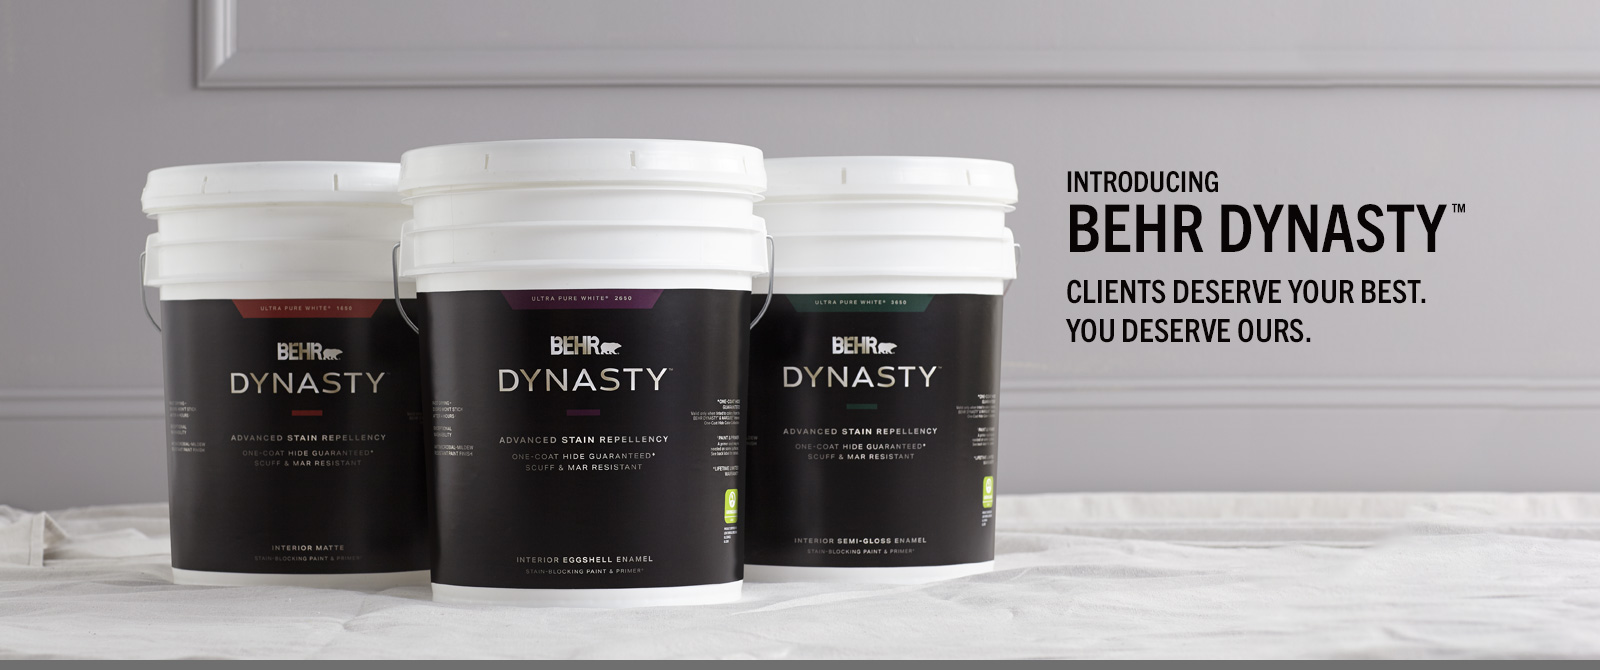 NEW BEHR DYNASTY - Clients Deserve Your Best, You deserve ours